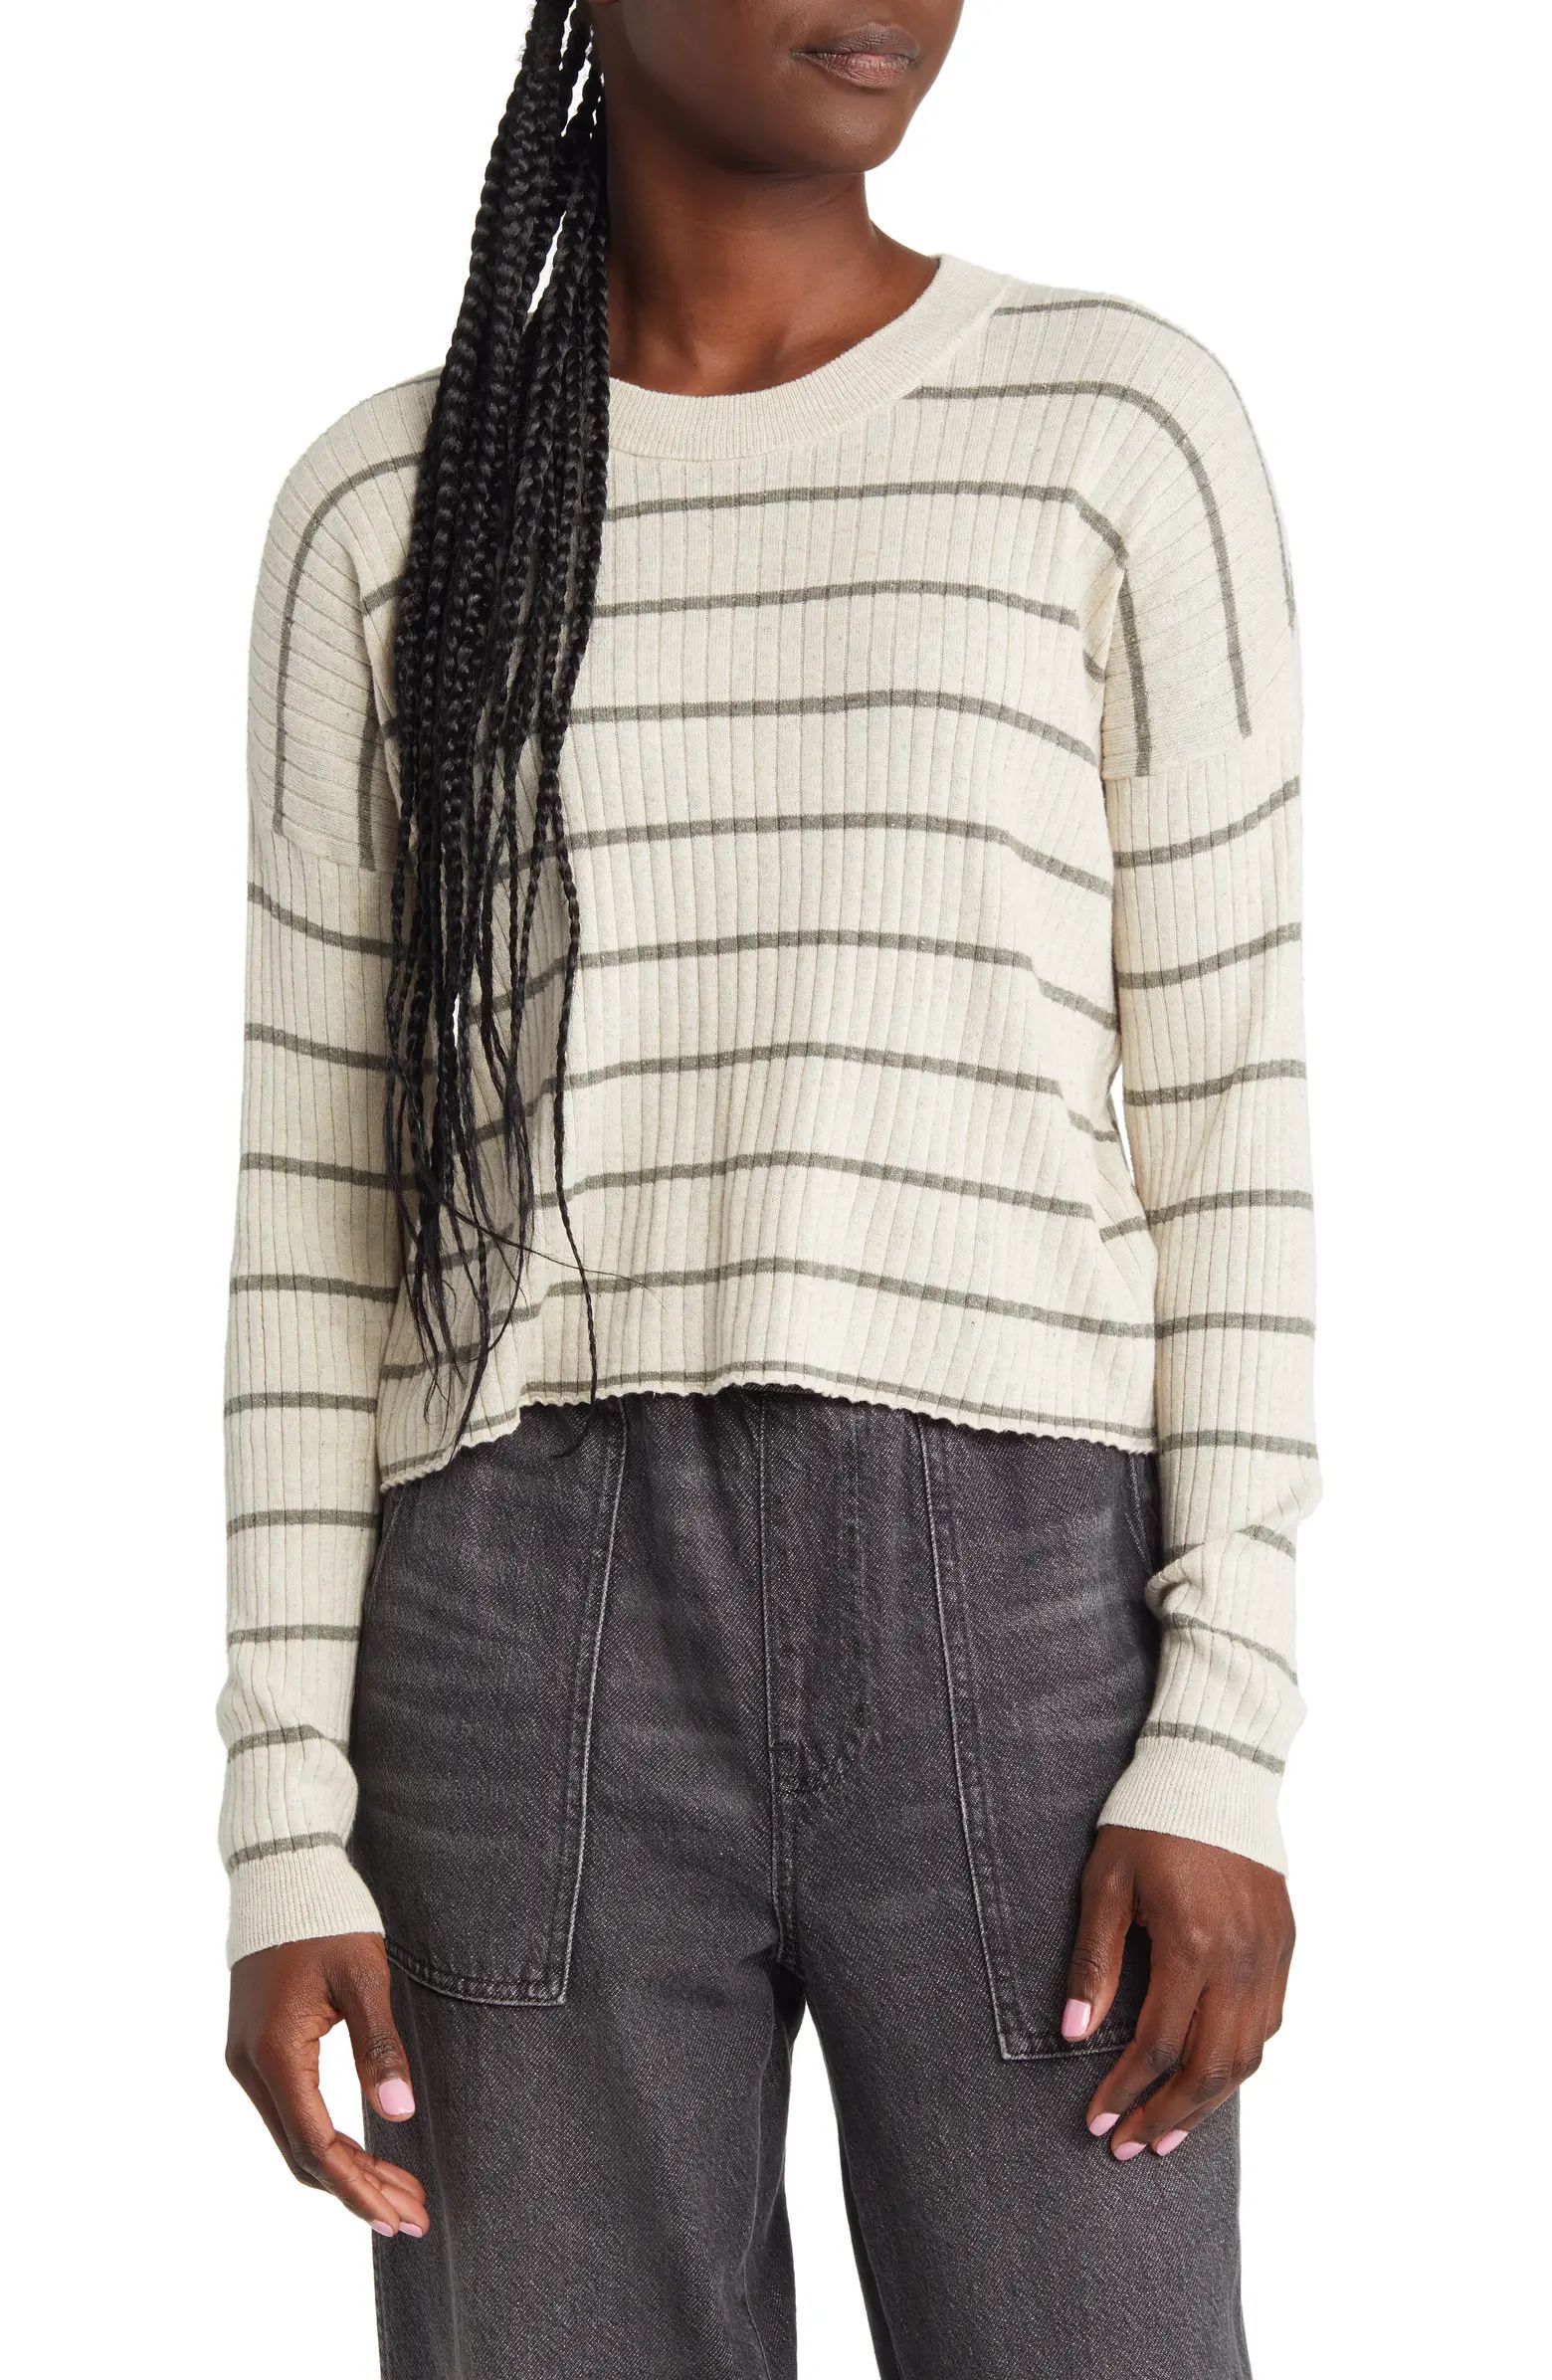 Madewell No Strings Attached Stripe Crewneck Sweater | Nordstrom | Nordstrom